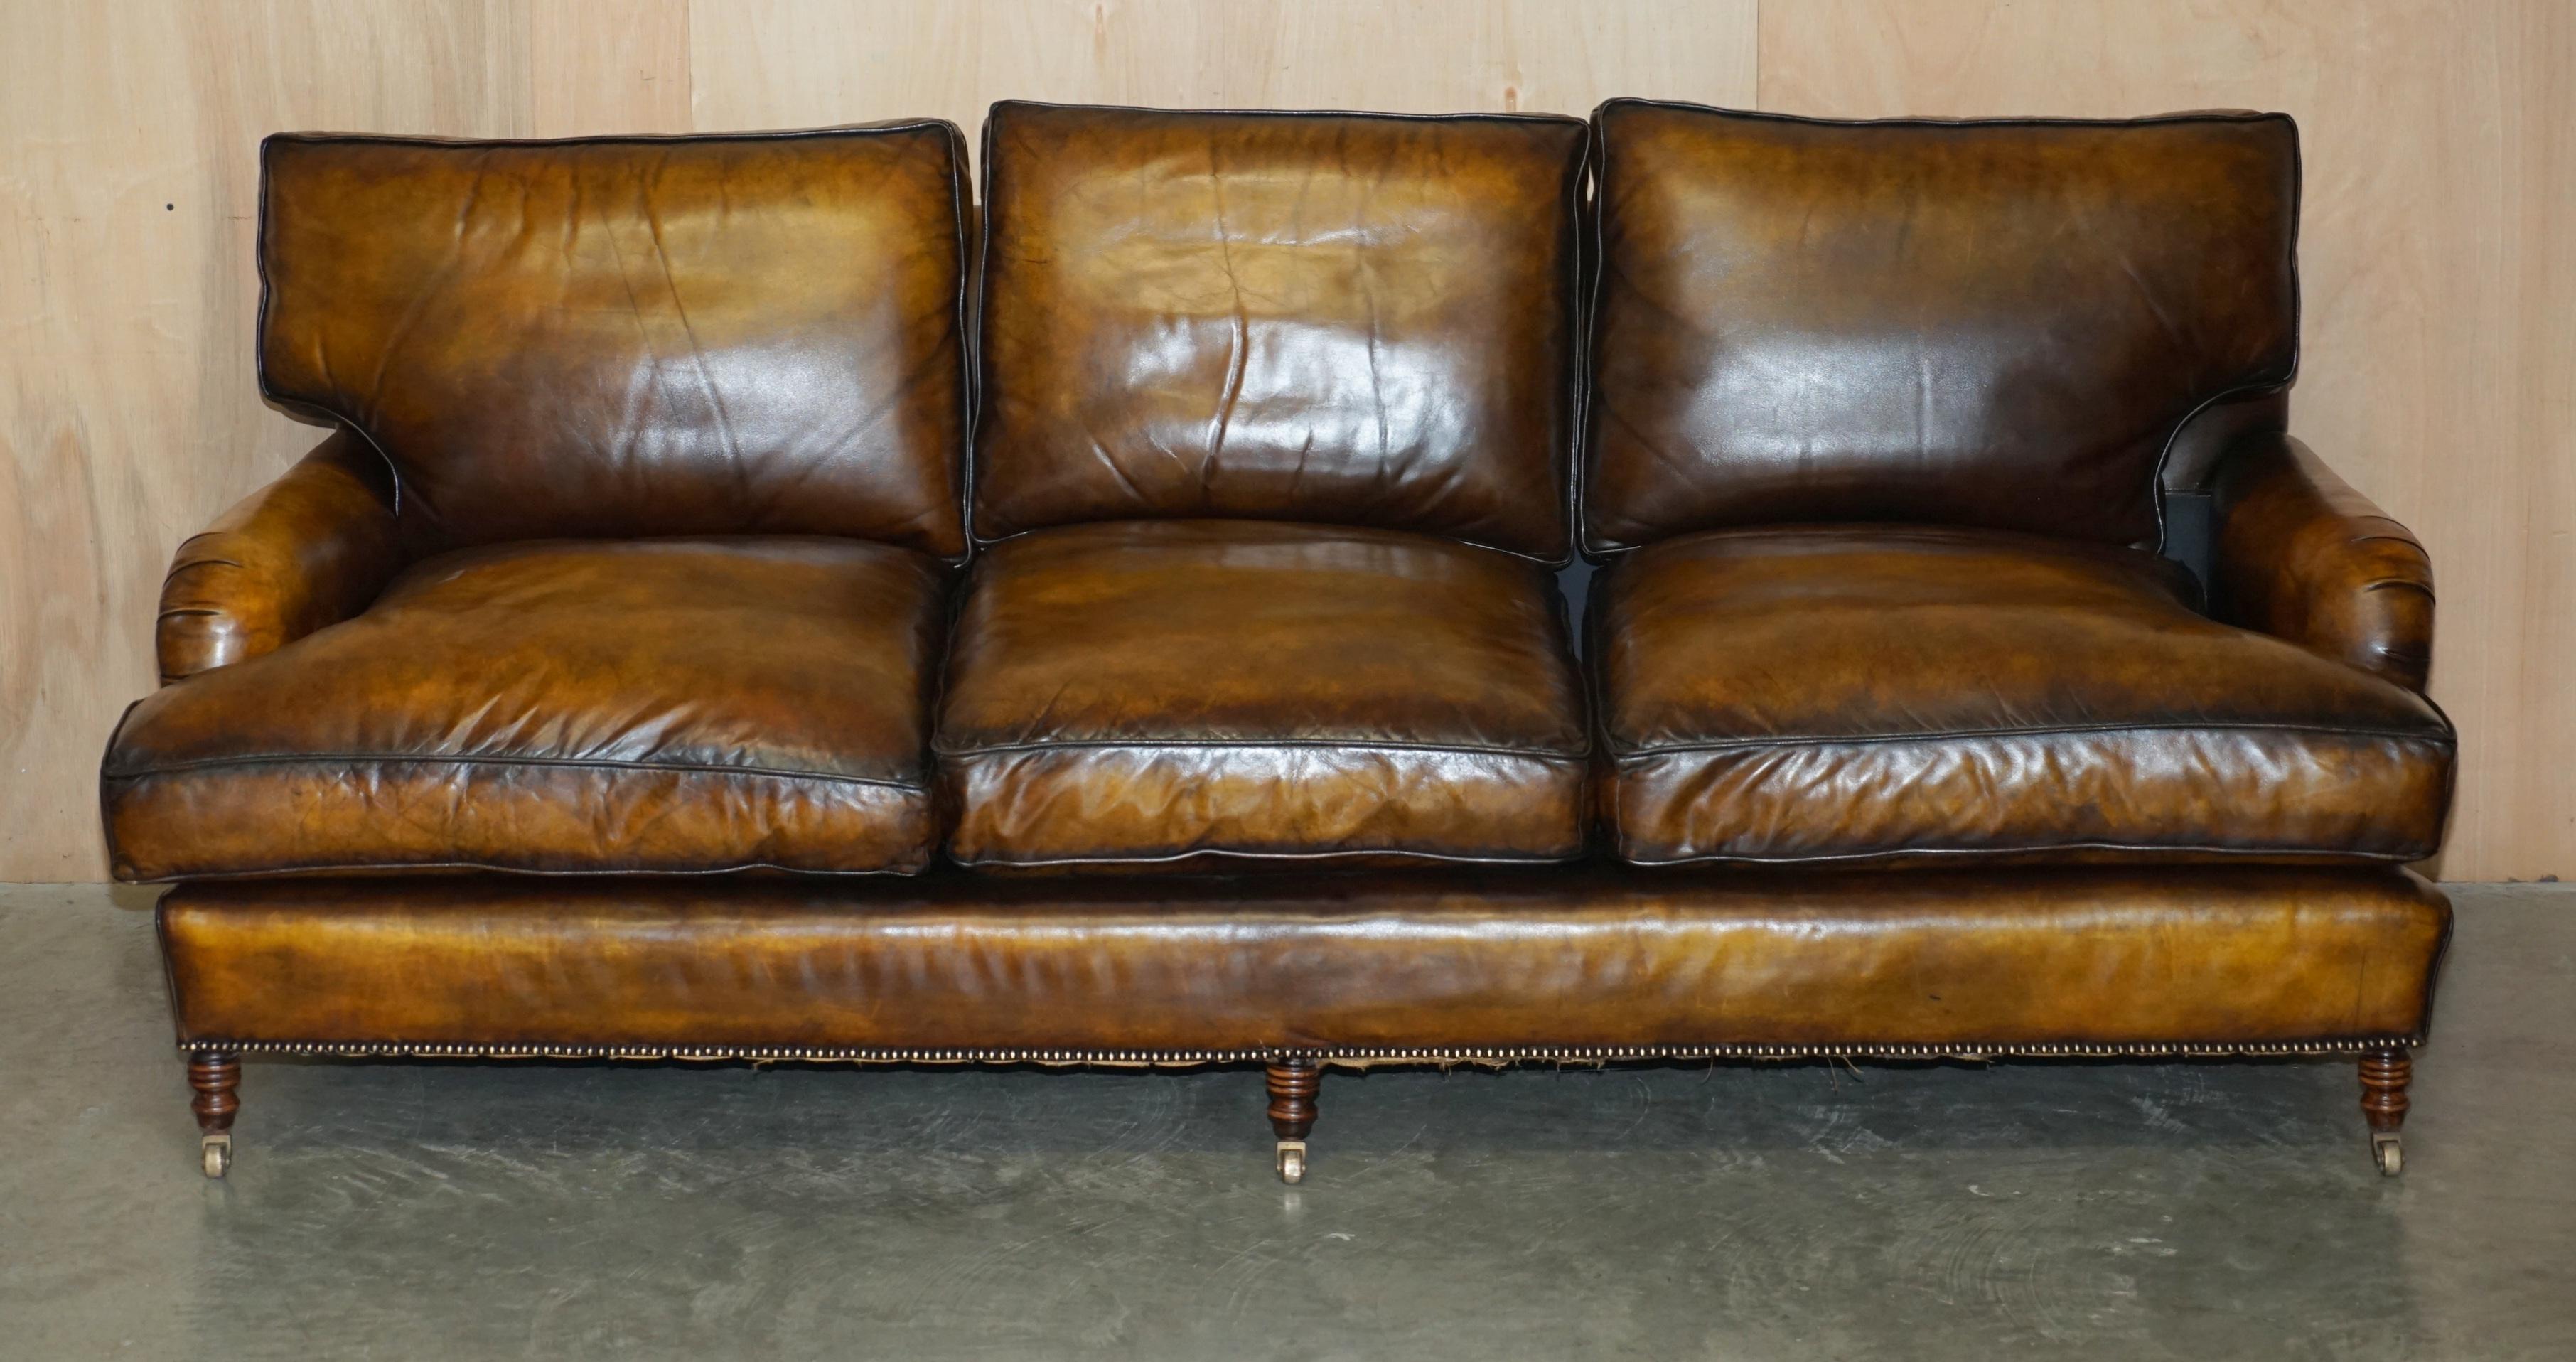 Royal House Antiques

Royal House Antiques is delighted to offer for sale one of two fully restored, deep seated, George Smith Signature Scroll Arm large sofas with feather filled base cushions upholstered with the original Heritage brown leather